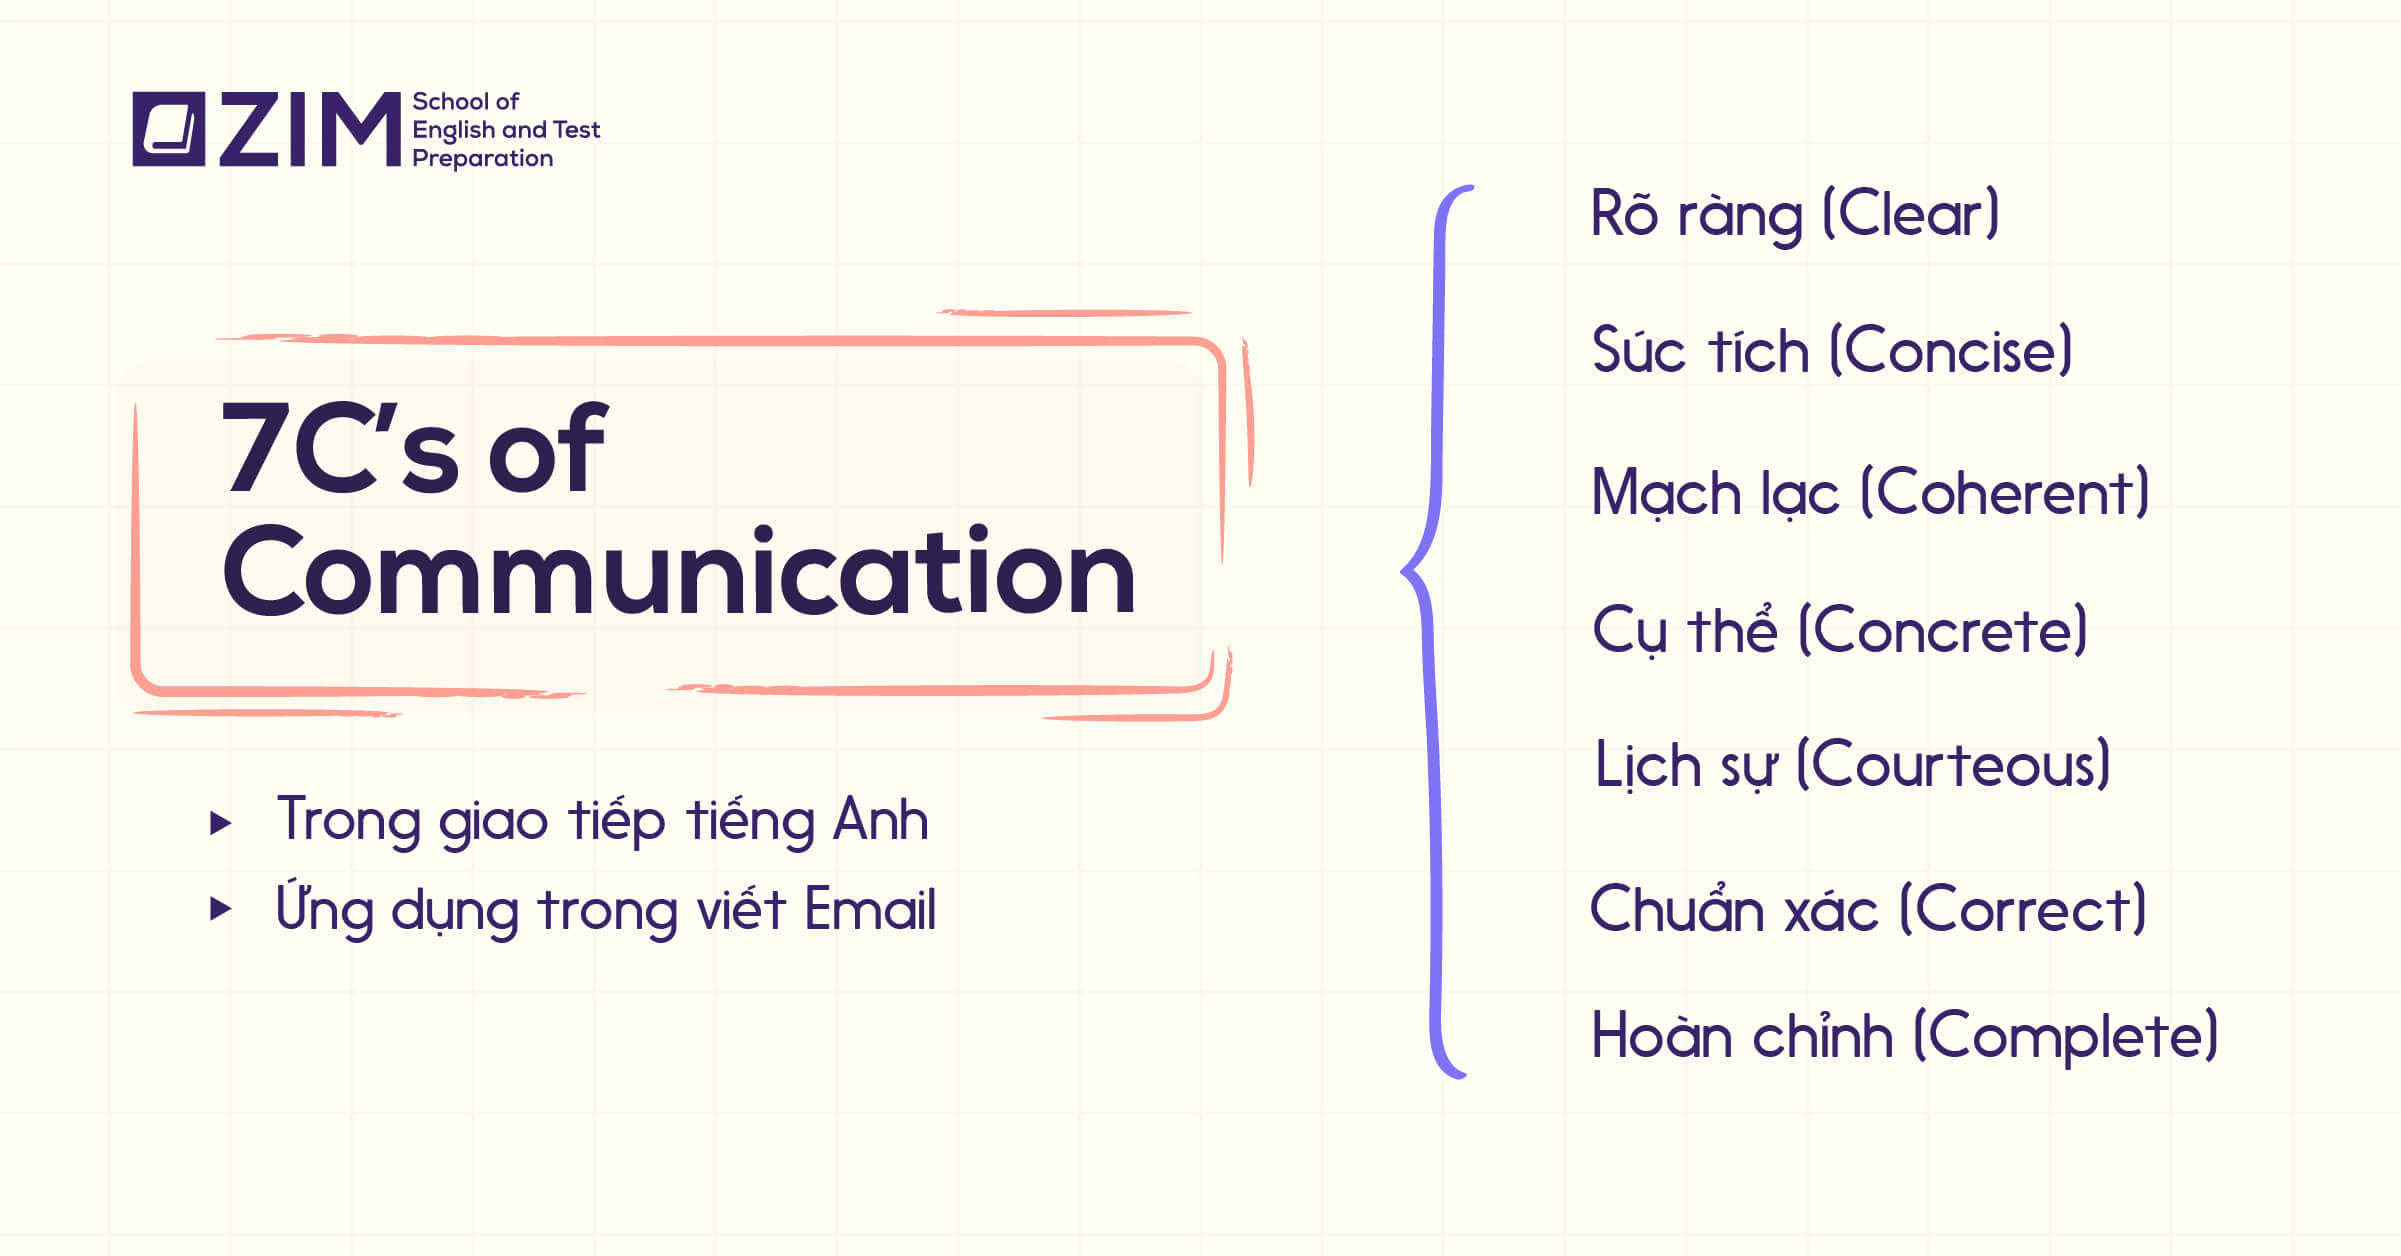 gioi-thieu-va-phan-tich-7cs-of-communication-trong-giao-tiep-tieng-anh-ung-dung-trong-viet-email